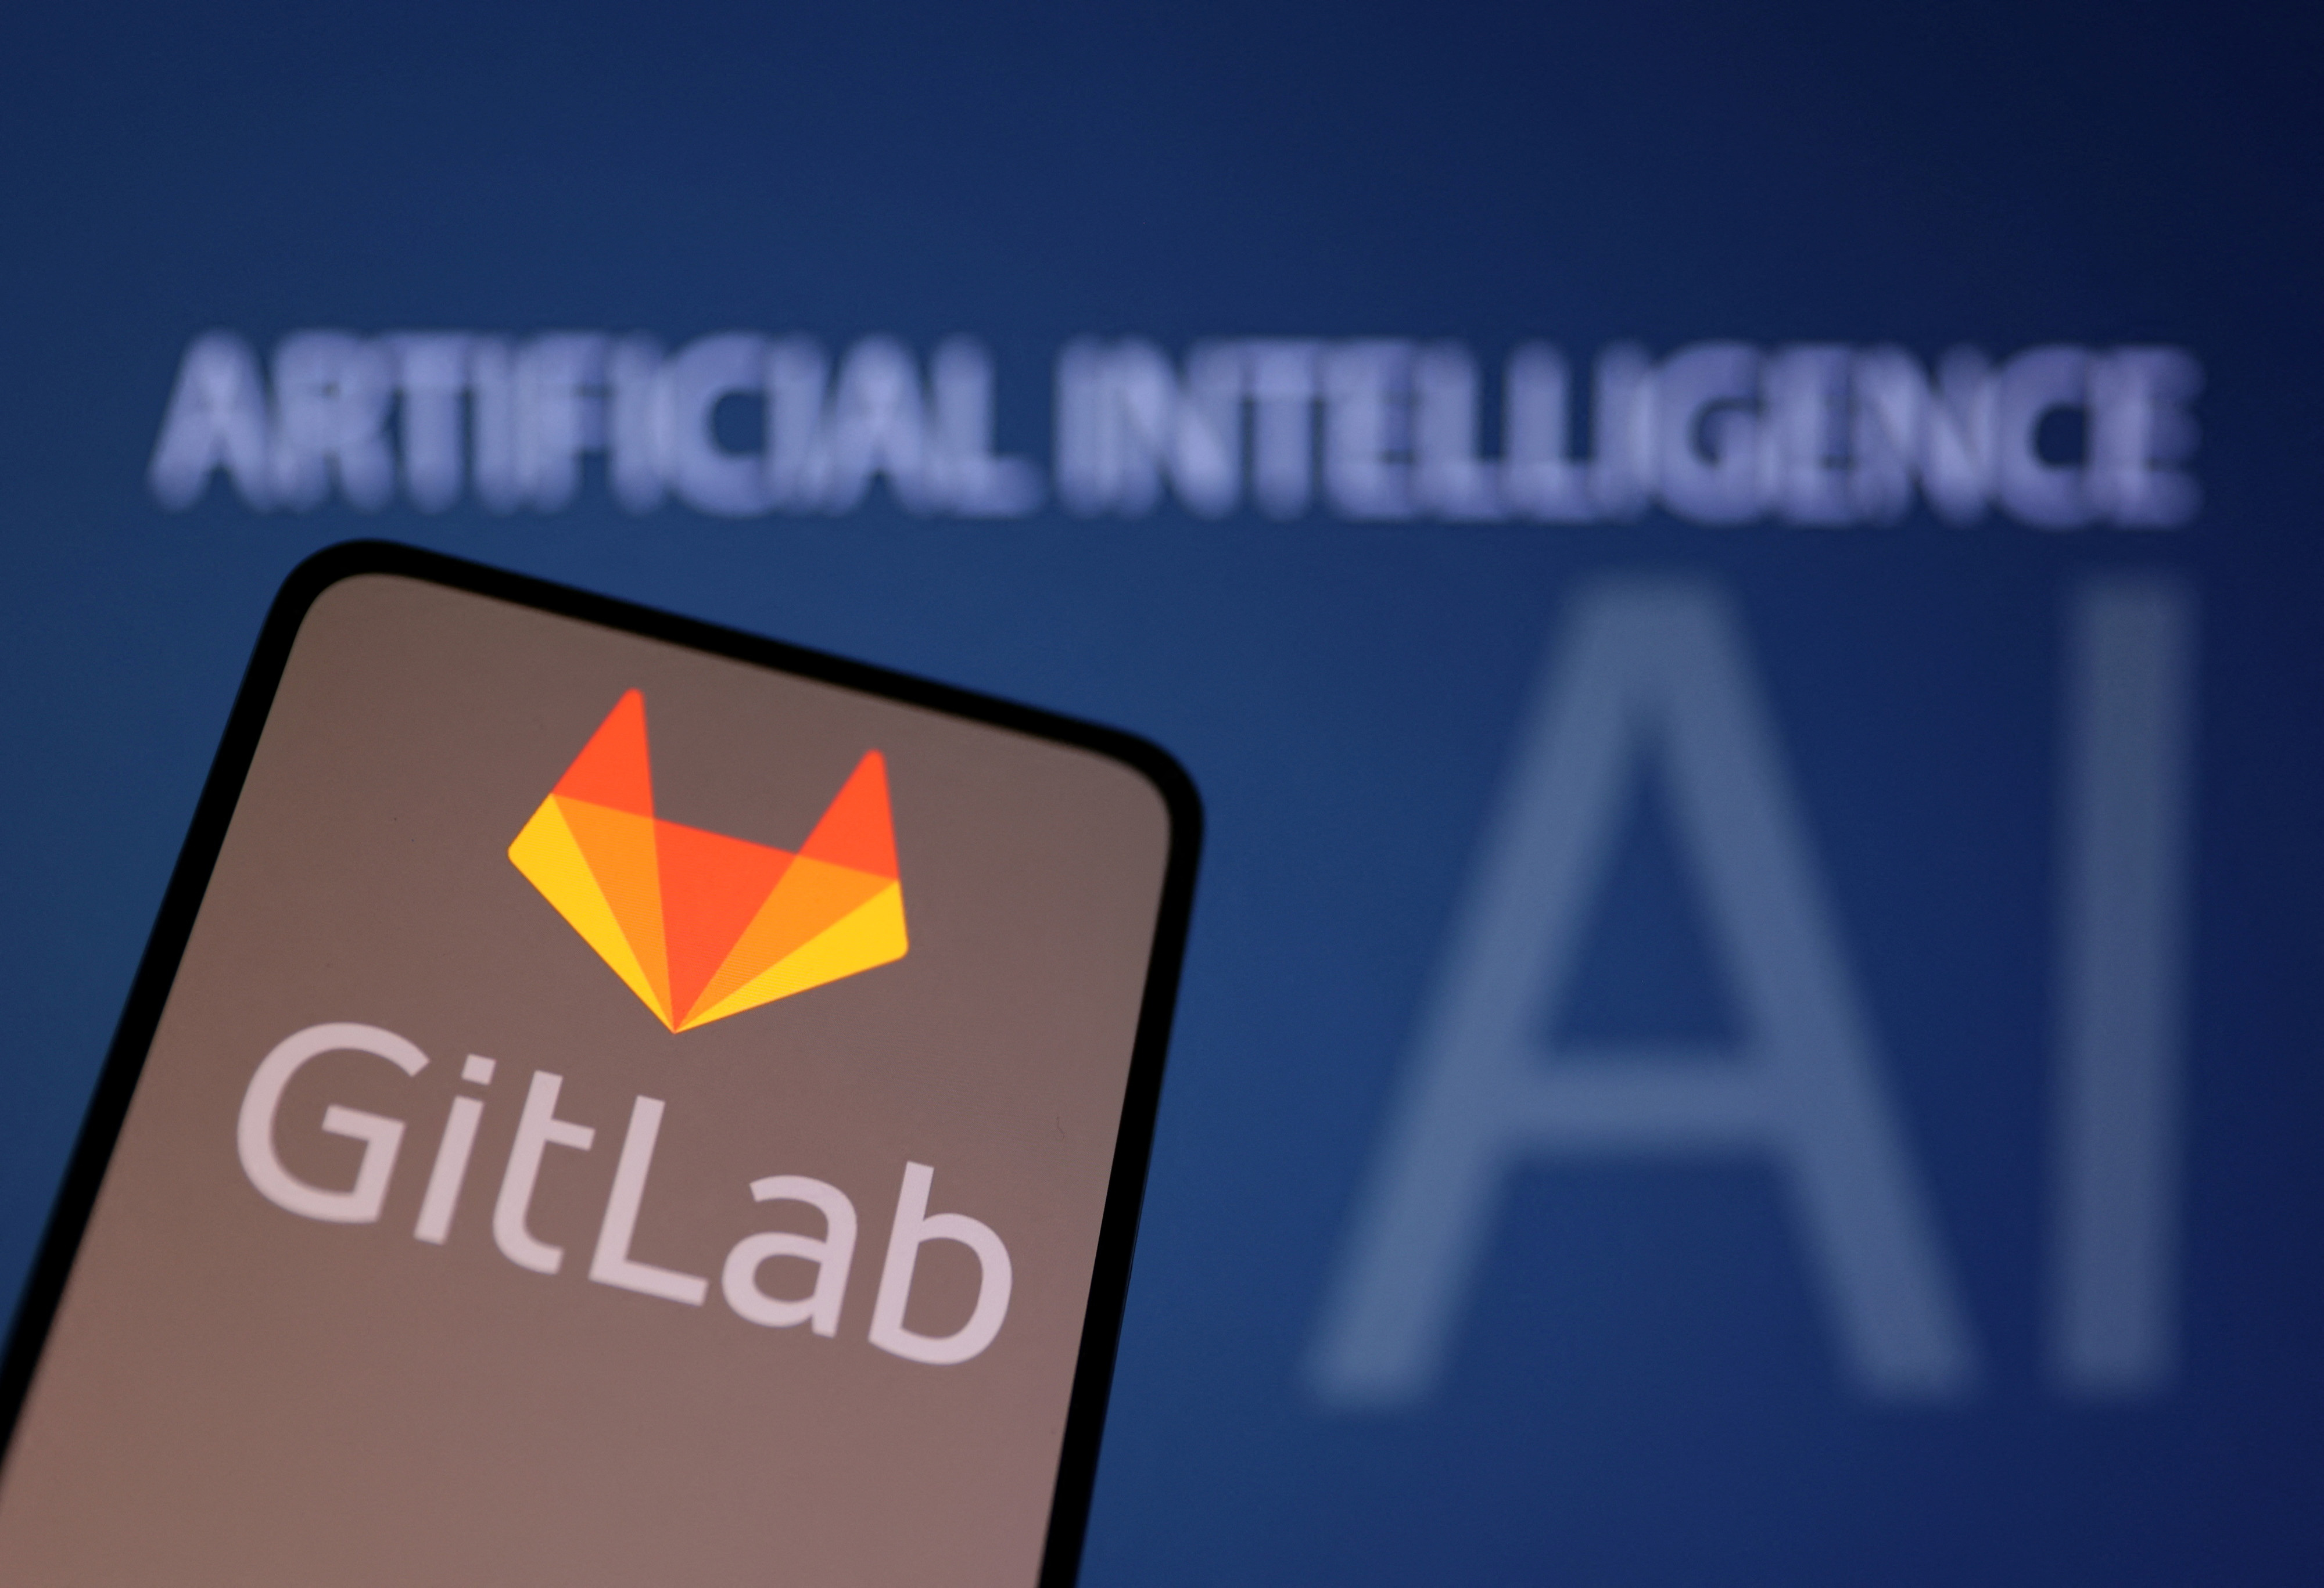 Illustration shows GitLab Inc logo and words 'Artificial Intelligence'